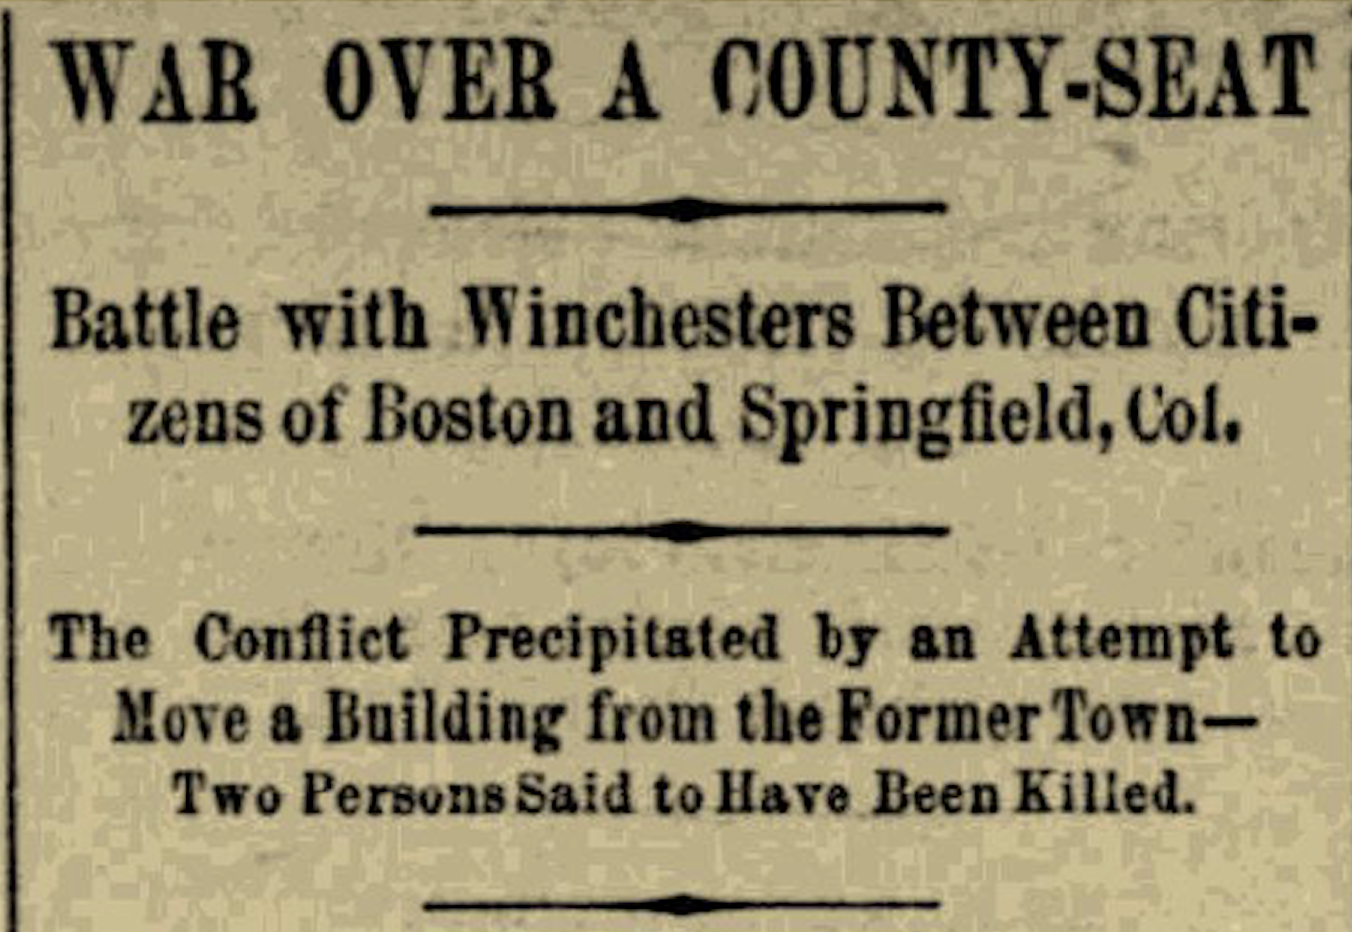 The Burning of the Boston Colorado Hotel: An 1890 Flashback to the County Seat Wars of the American West